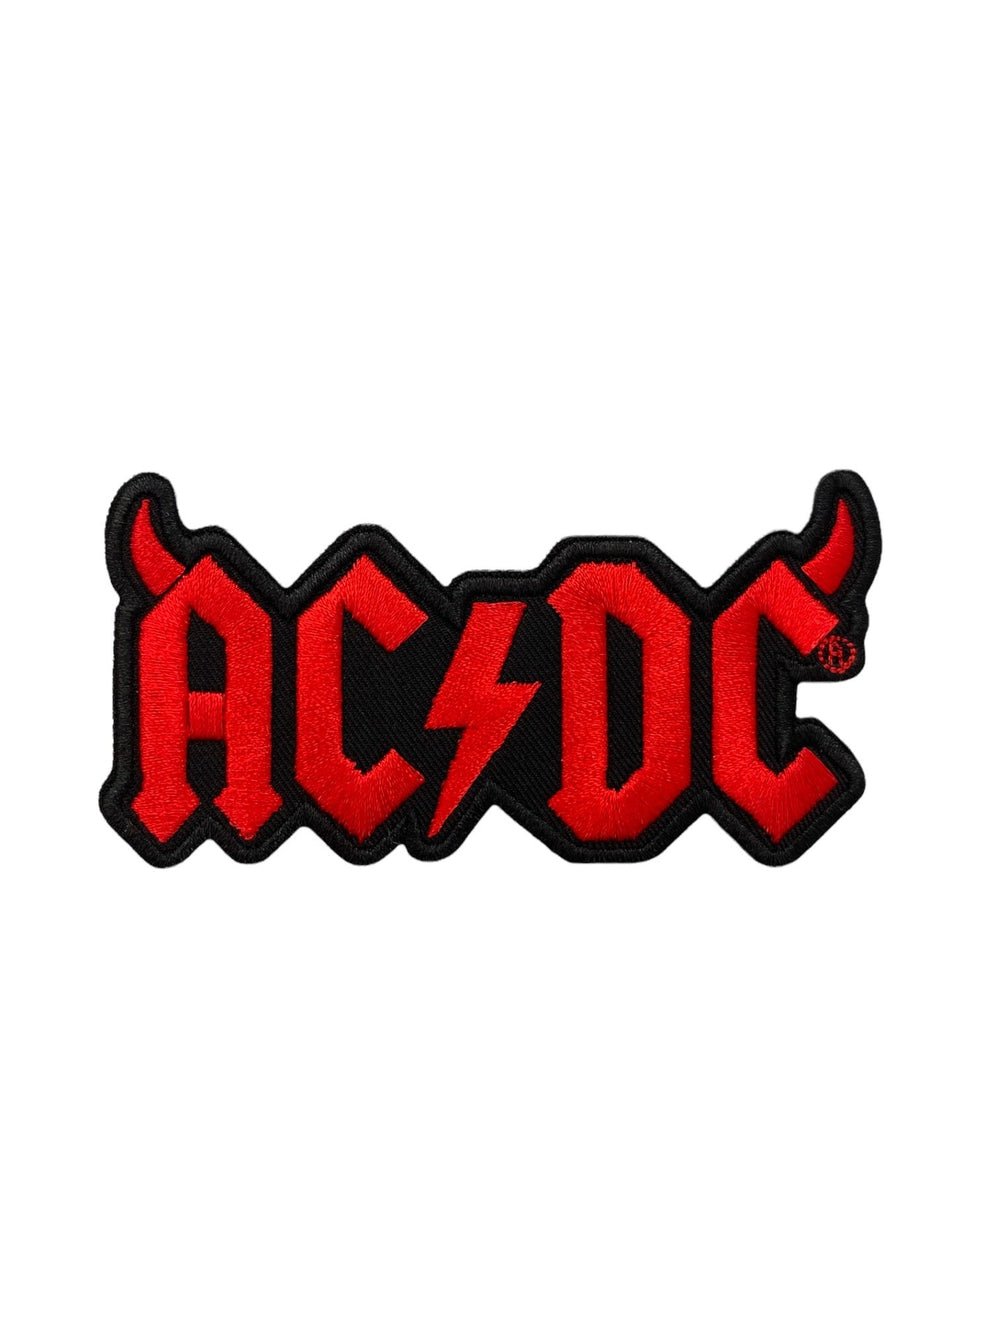 AC/DC Red Logo Horns Official Woven Patch Brand New